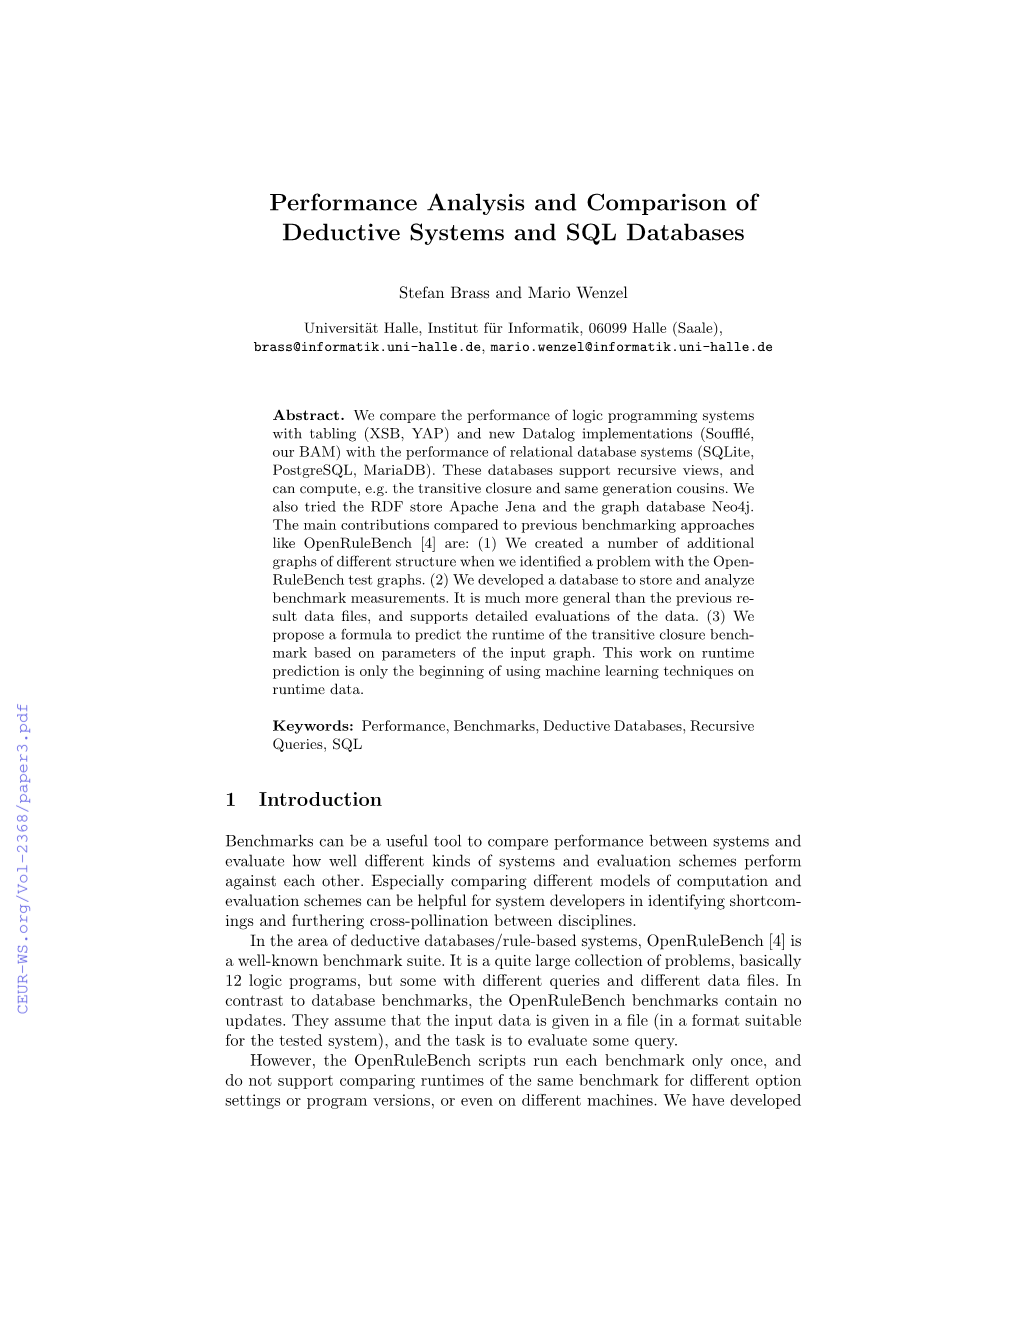 Performance Analysis and Comparison of Deductive Systems and SQL Databases